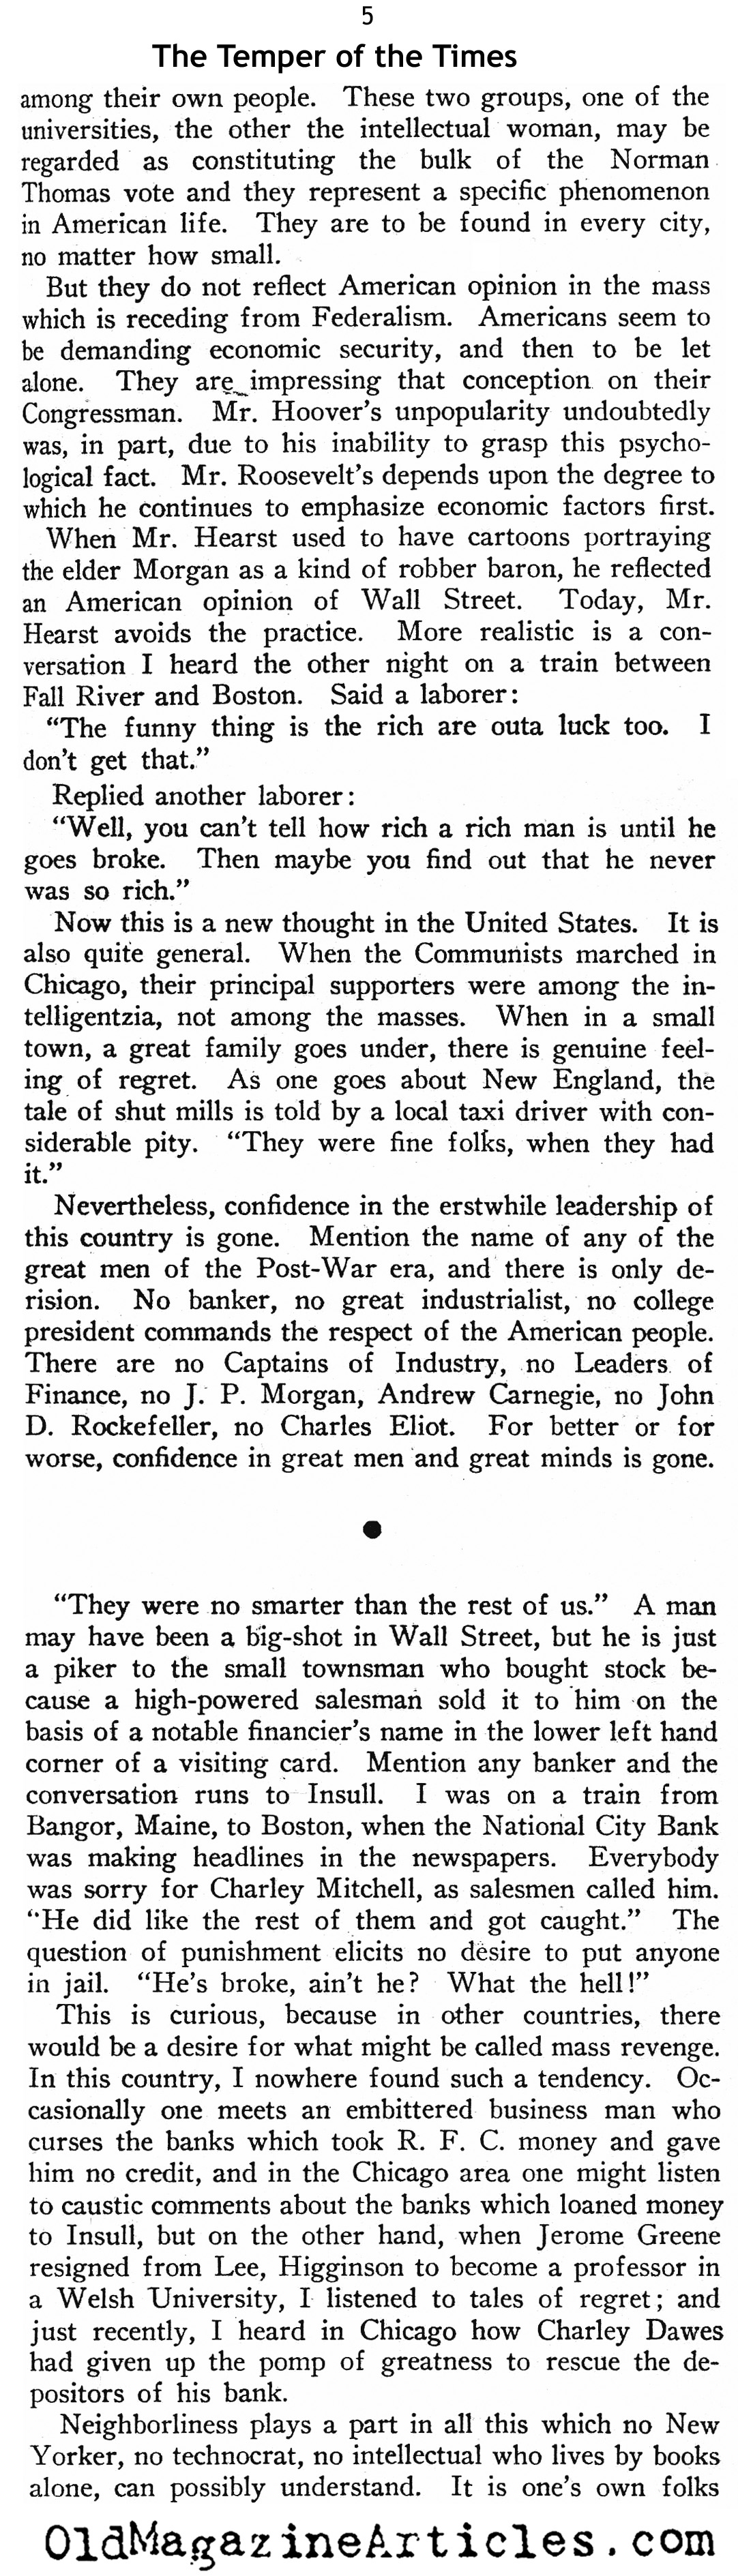 The Temper of the Times (New Outlook Magazine, 1933)